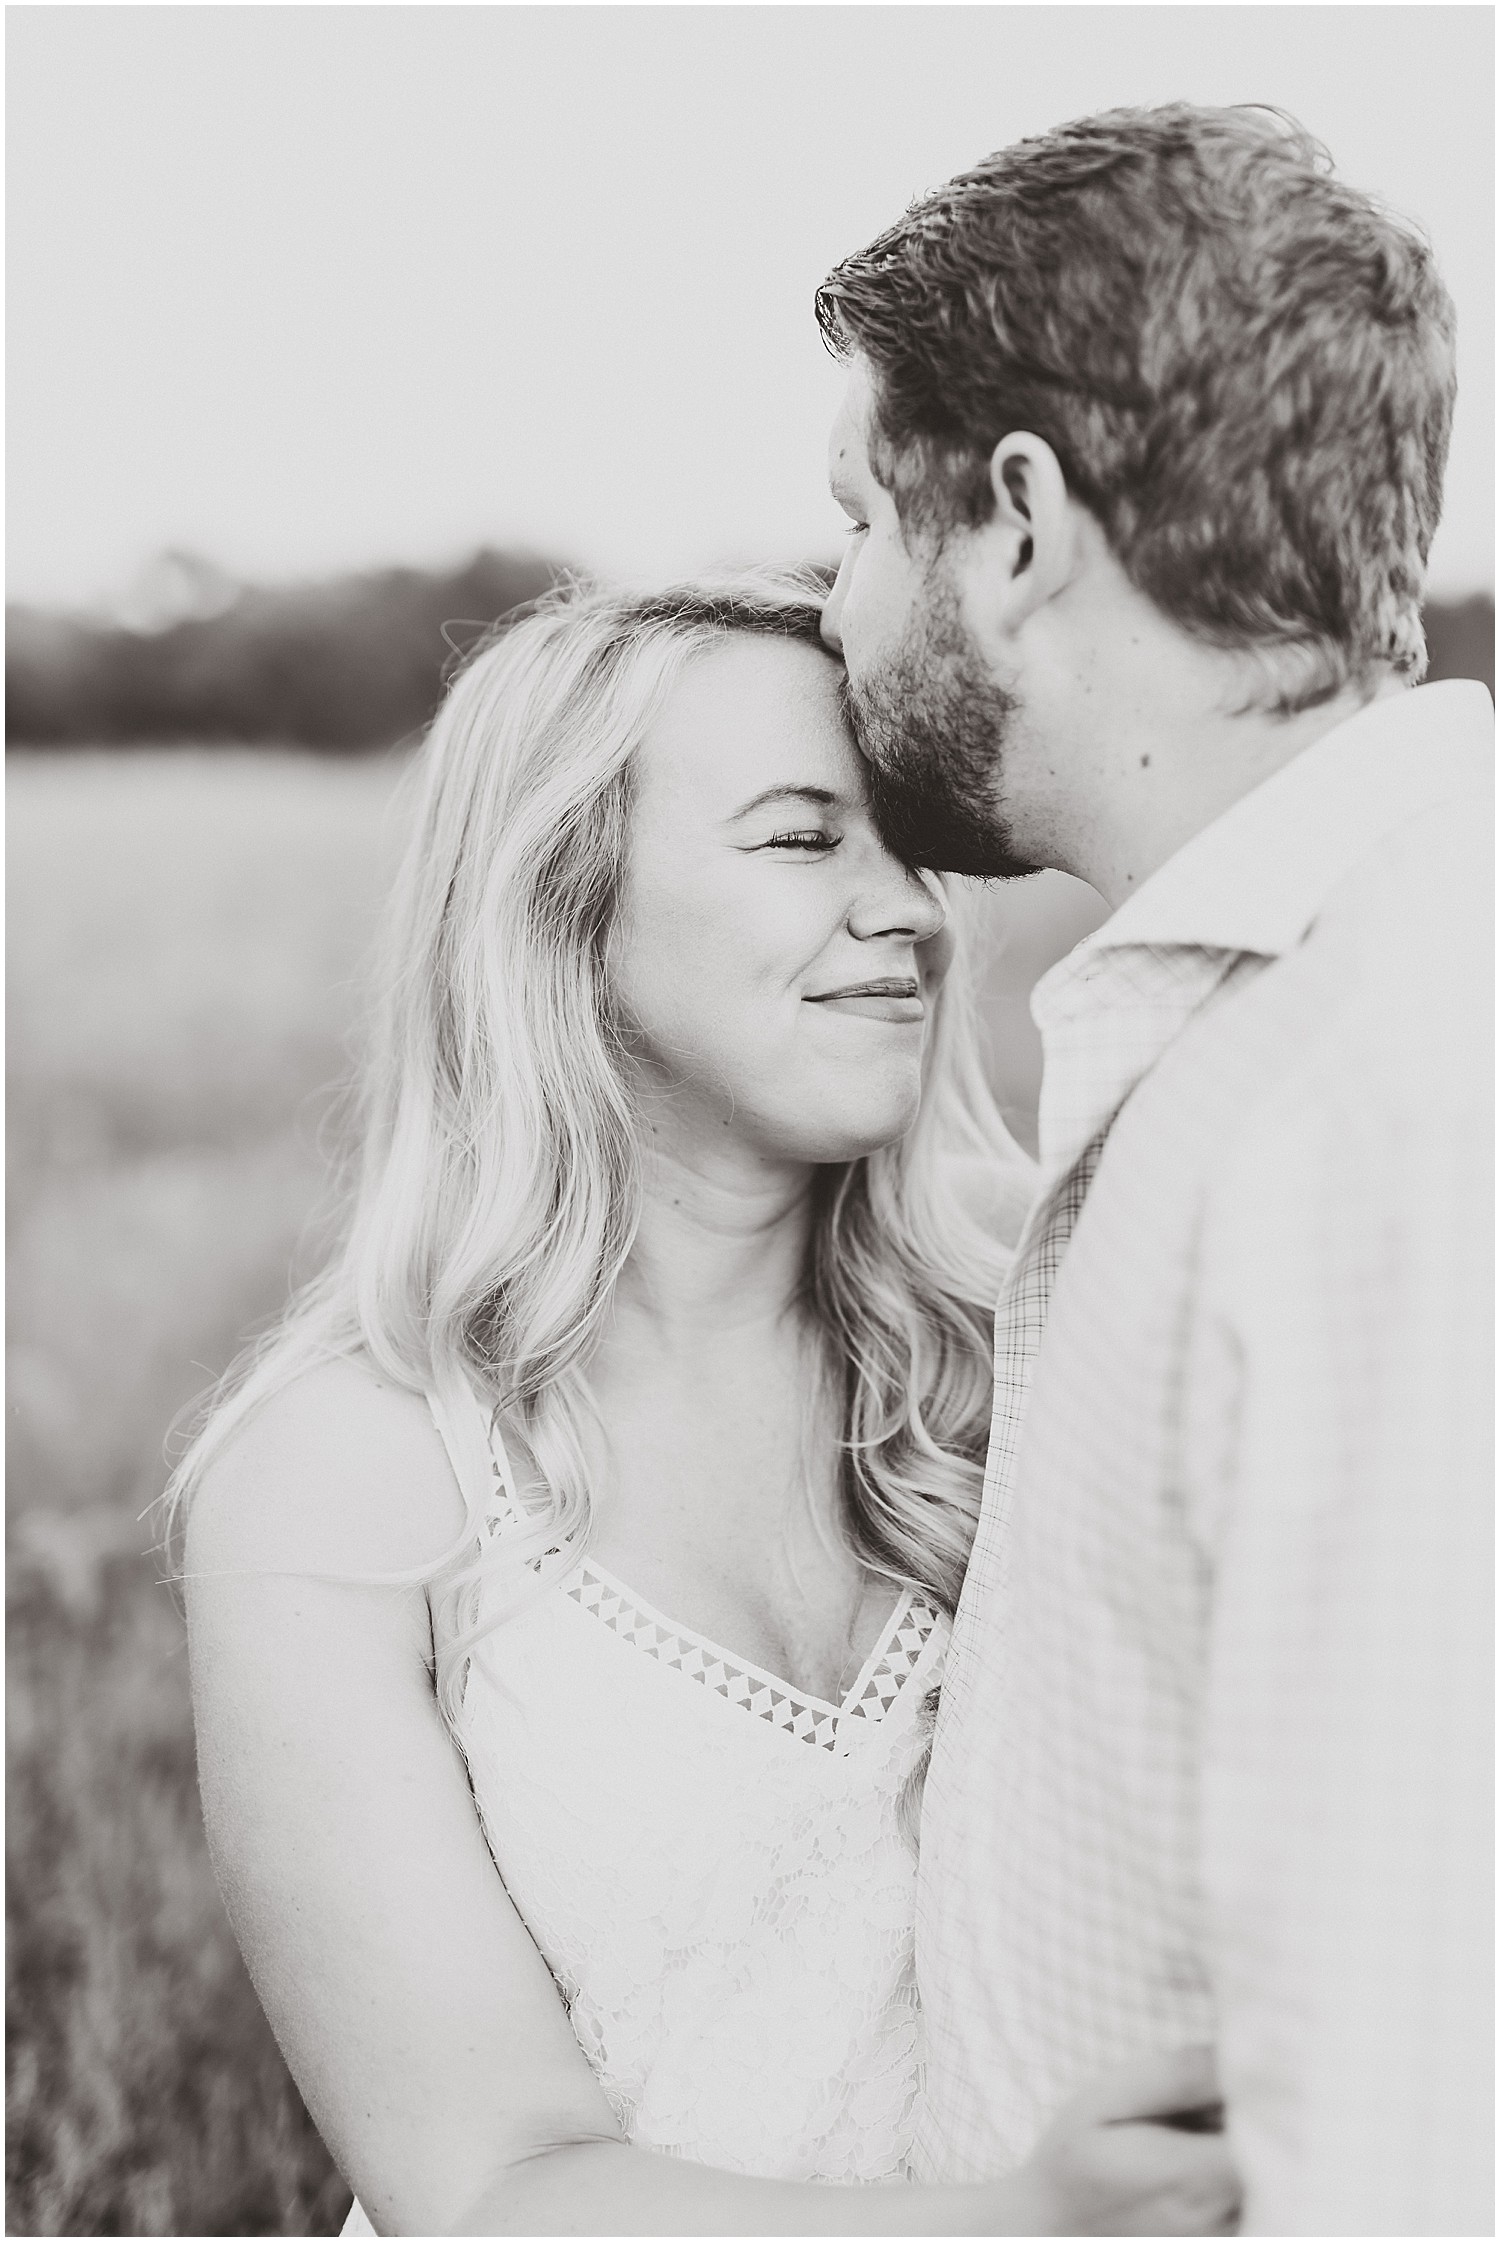 Cooper's ridge engagement session couple kissing in black and white